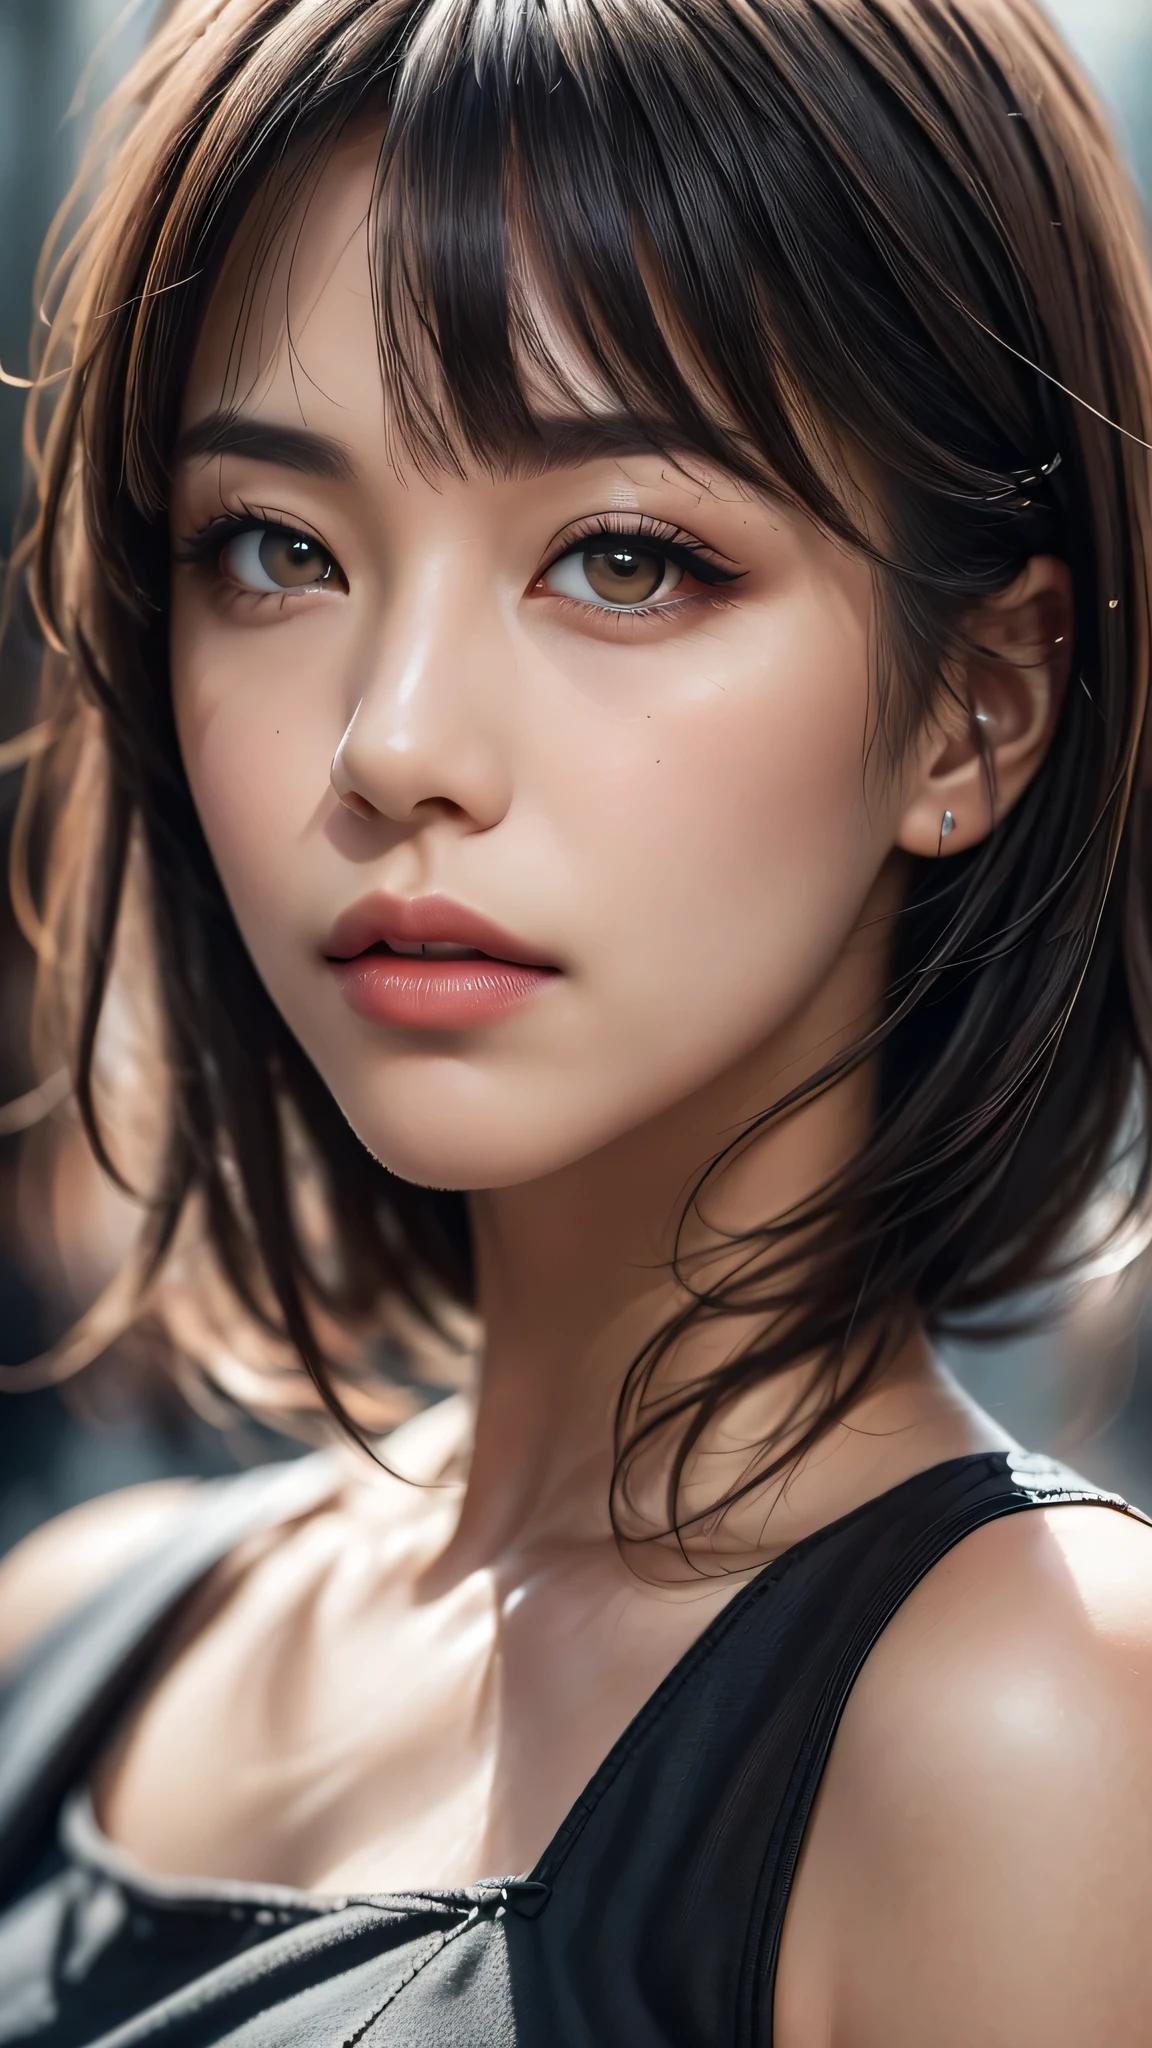 dressed, (photo realistic:1.4), (hyper realistic:1.4), (realistic:1.3), (smoother lighting:1.05), (increase cinematic lighting quality:0.9), 32K, 1girl,25yo girl, realistic lighting, backlighting, light on face, ray trace, (brightening light:1.2), (Increase quality:1.4), (best quality real texture skin:1.4), finely detailed eyes, finely detailed face, finely quality eyes, (tired and sleepy and satisfied:0.0), (((face closeup))), bikini, korean girl, (Increase body line mood:1.1), (Increase skin texture beauty:1.1), (light makeup, [[pink lipstick]], eyeliner), (Brown eyes), ((light dark short (side swept bangs), extremely detailed)), 